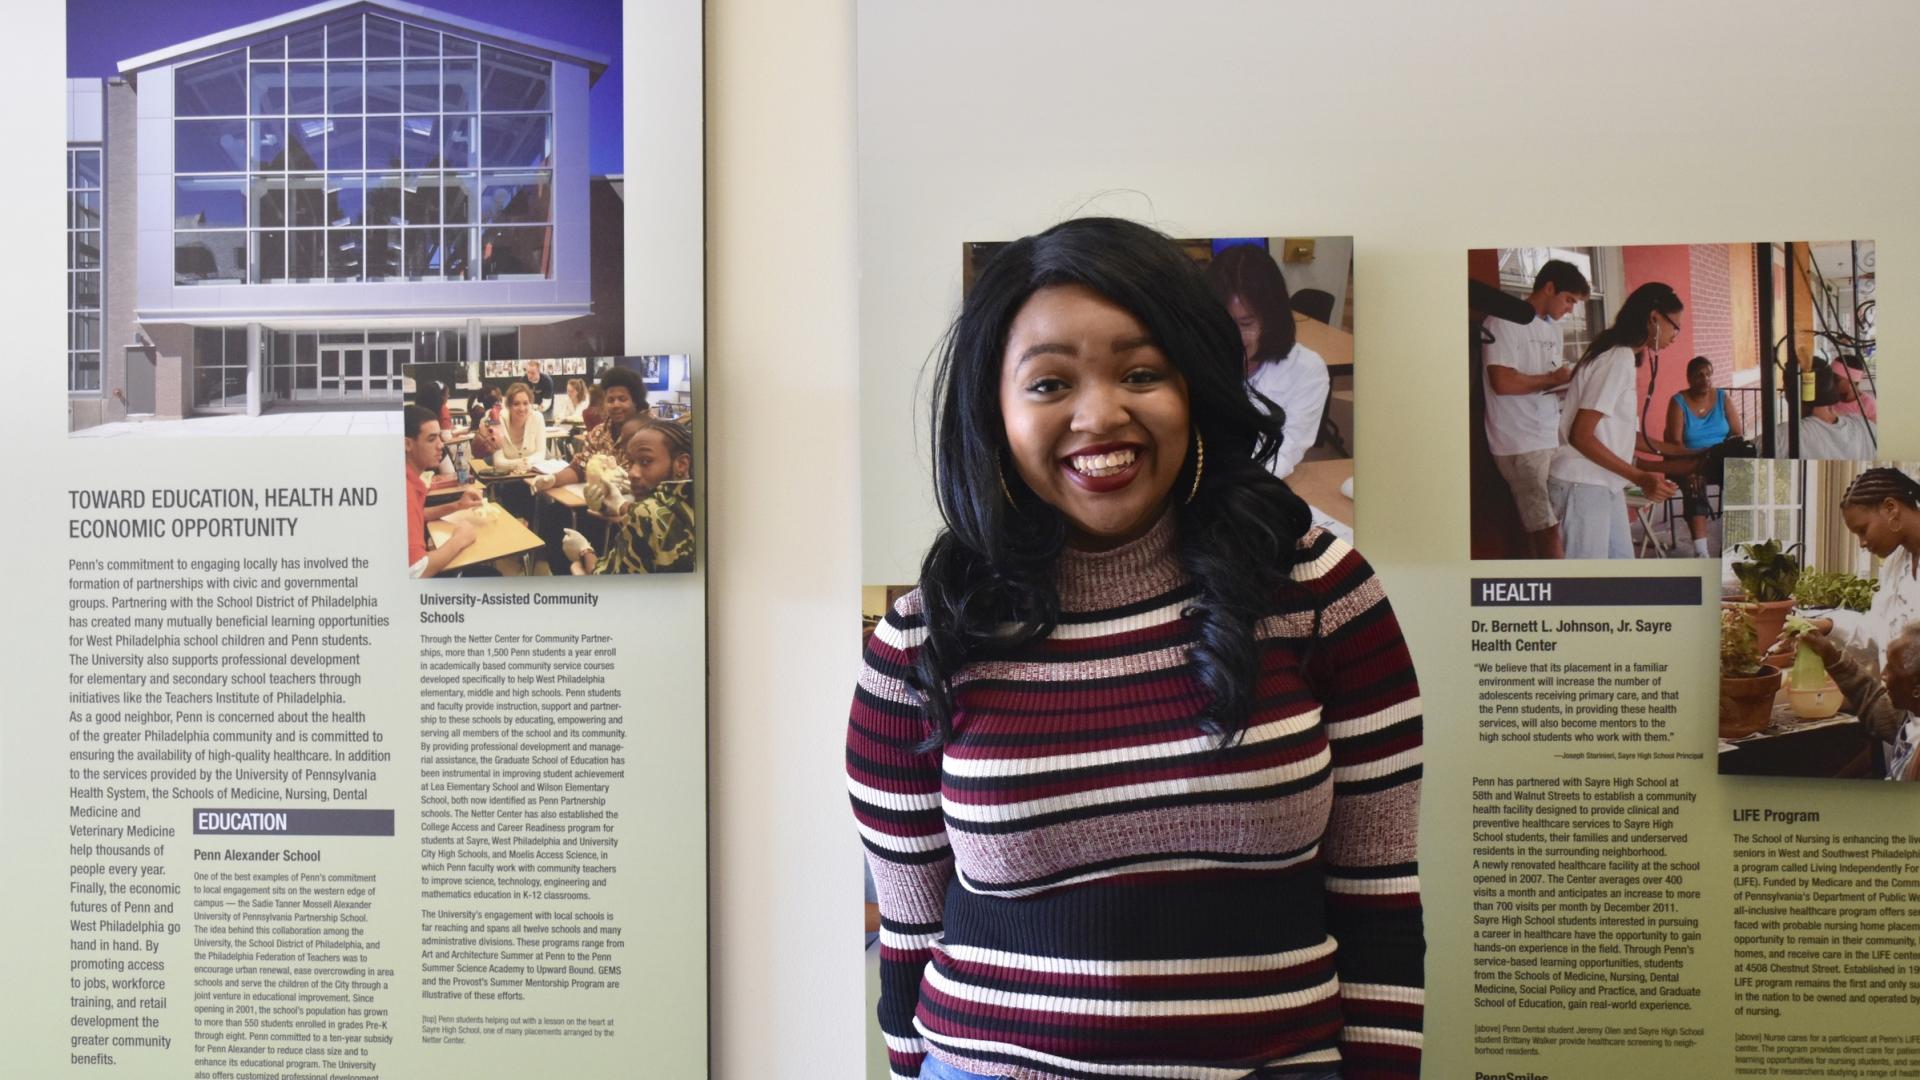 Student in front of signs in the Netter Center for Community Partnerships